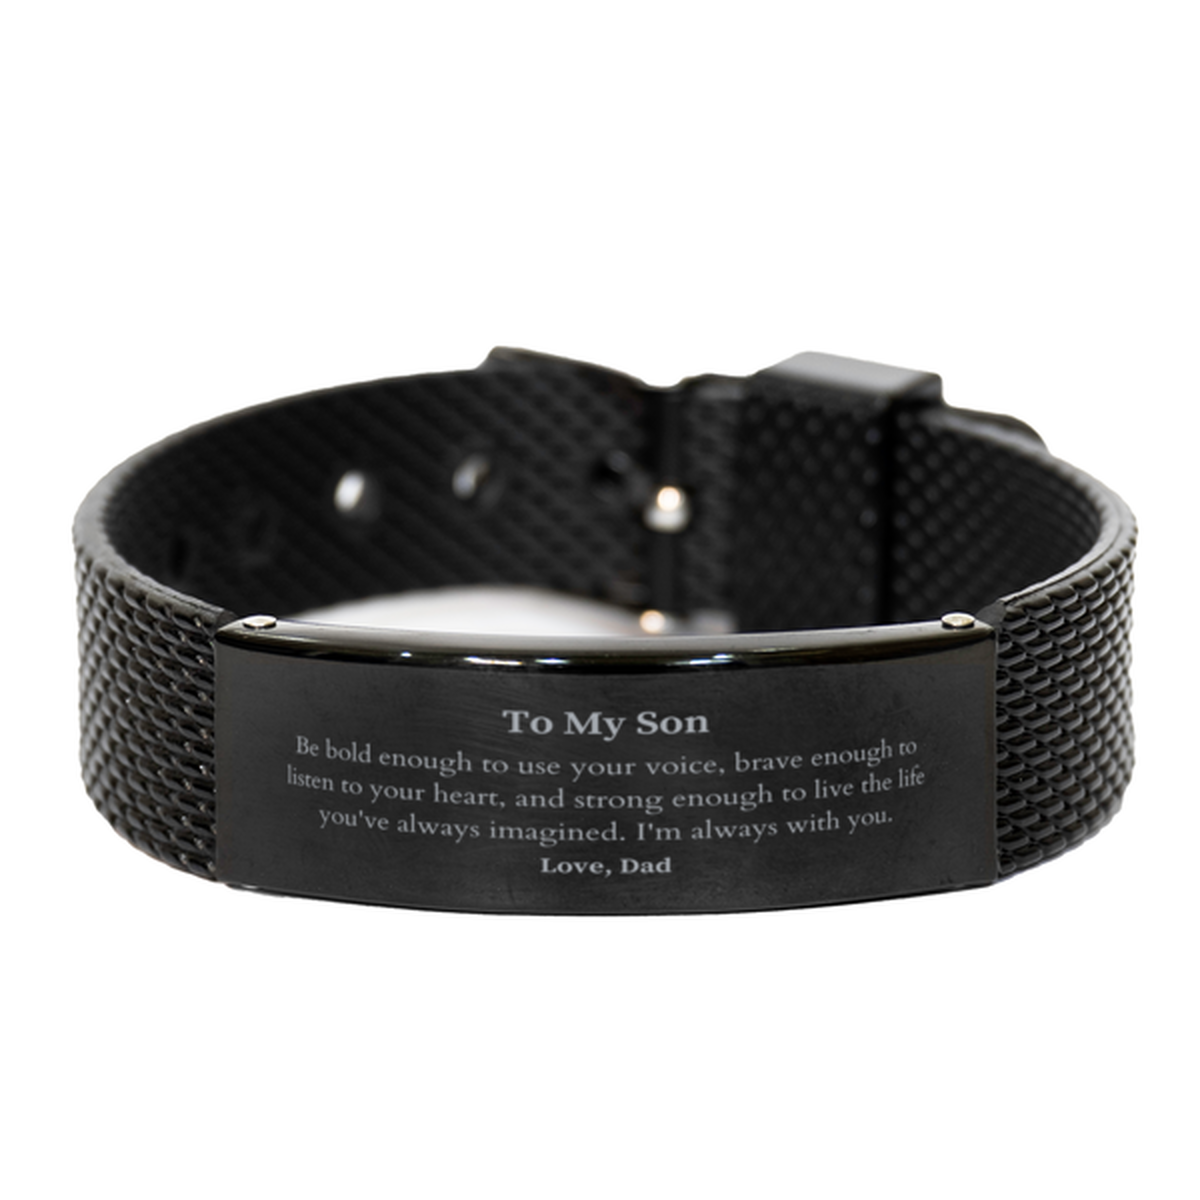 Keepsake Son Black Shark Mesh Bracelet Gift Idea Graduation Christmas Birthday Son from Dad, Son Be bold enough to use your voice, brave enough to listen to your heart. Love, Dad